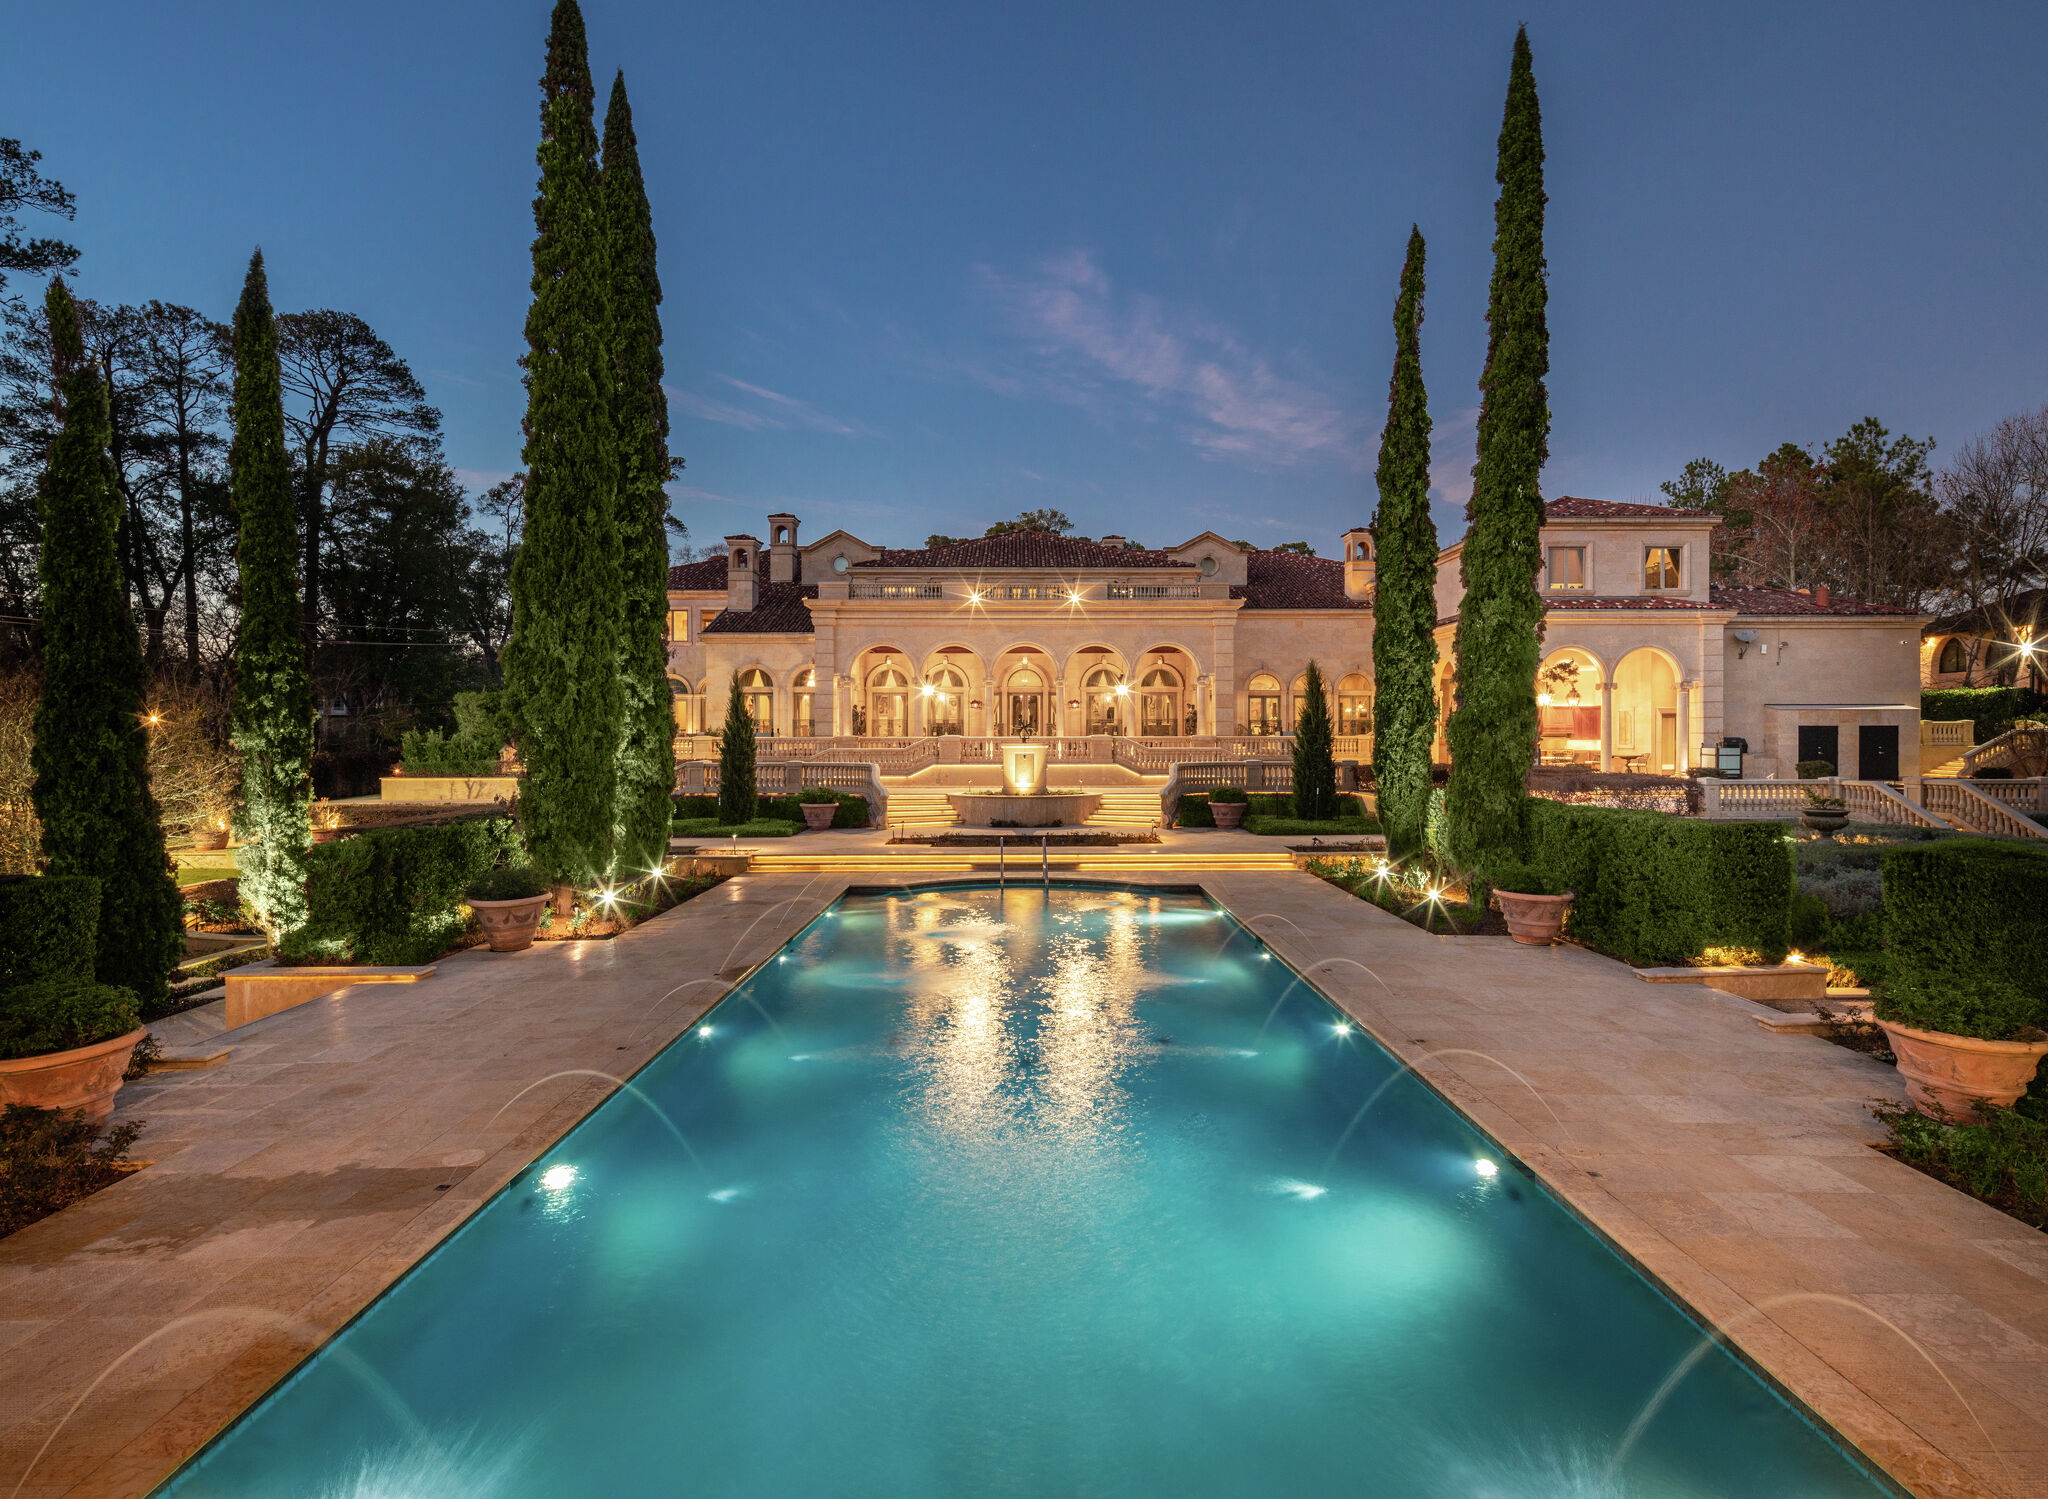 Houston’s 100 Carnarvon Drive is the most expensive listing